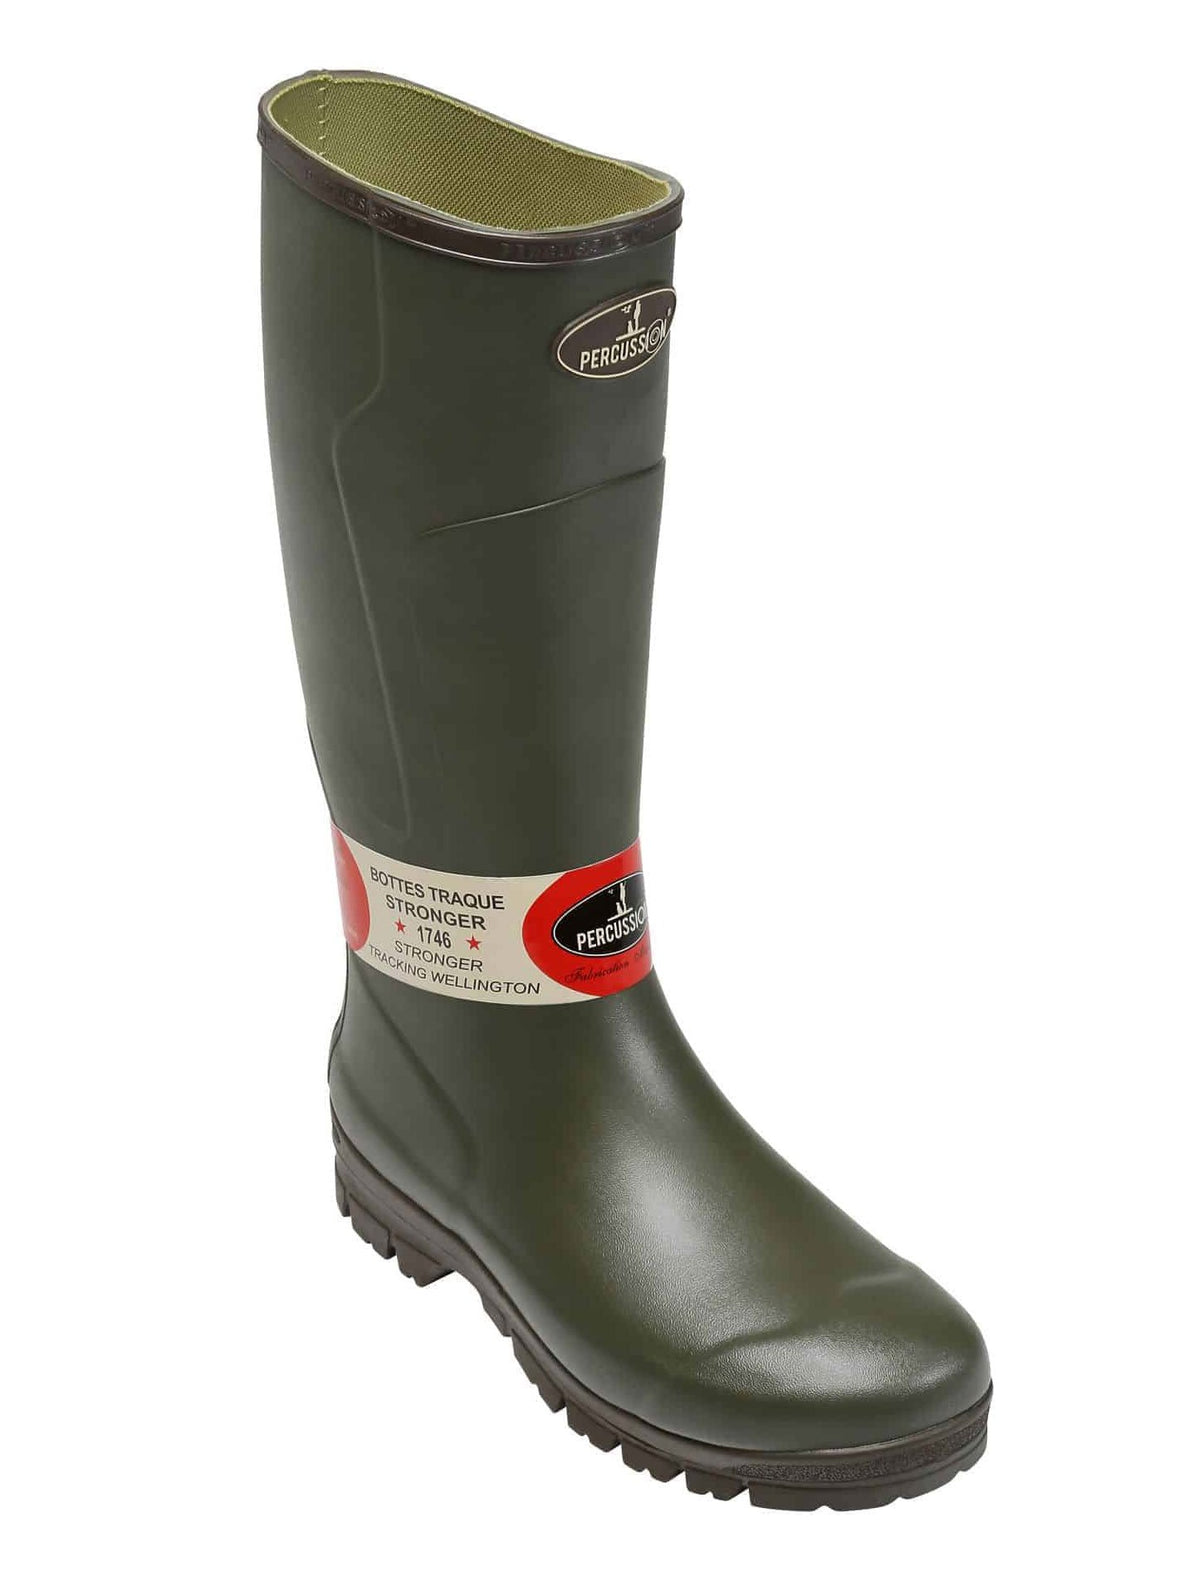 Percussion Beating Boots Rubber Wellingtons